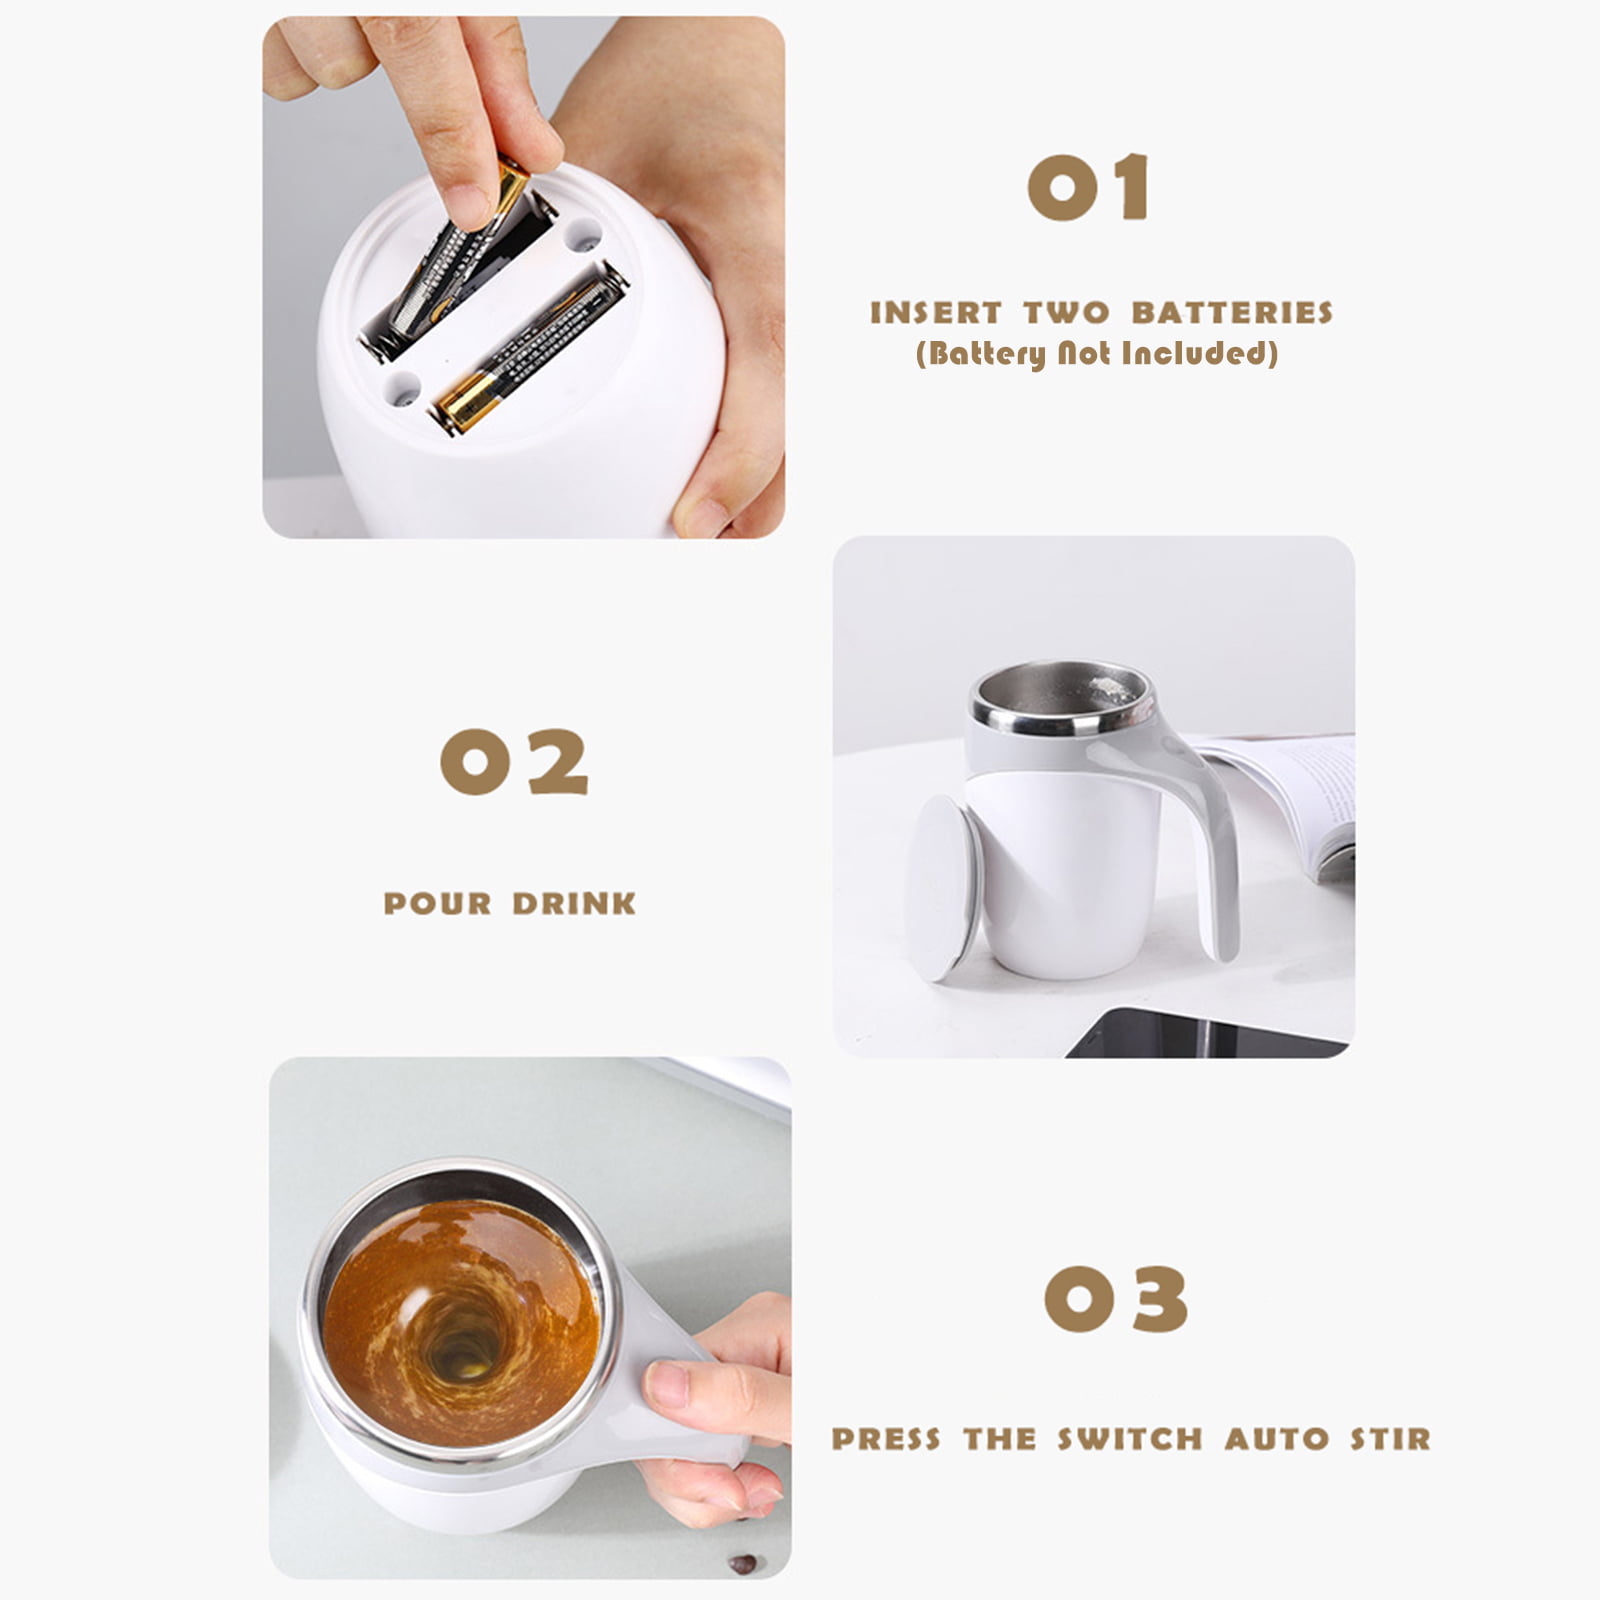 Self Stirring Coffee Mug,KittBaby Rechargeable Stainless Steel Automatic  Magnetic mixing cup for Cof…See more Self Stirring Coffee Mug,KittBaby